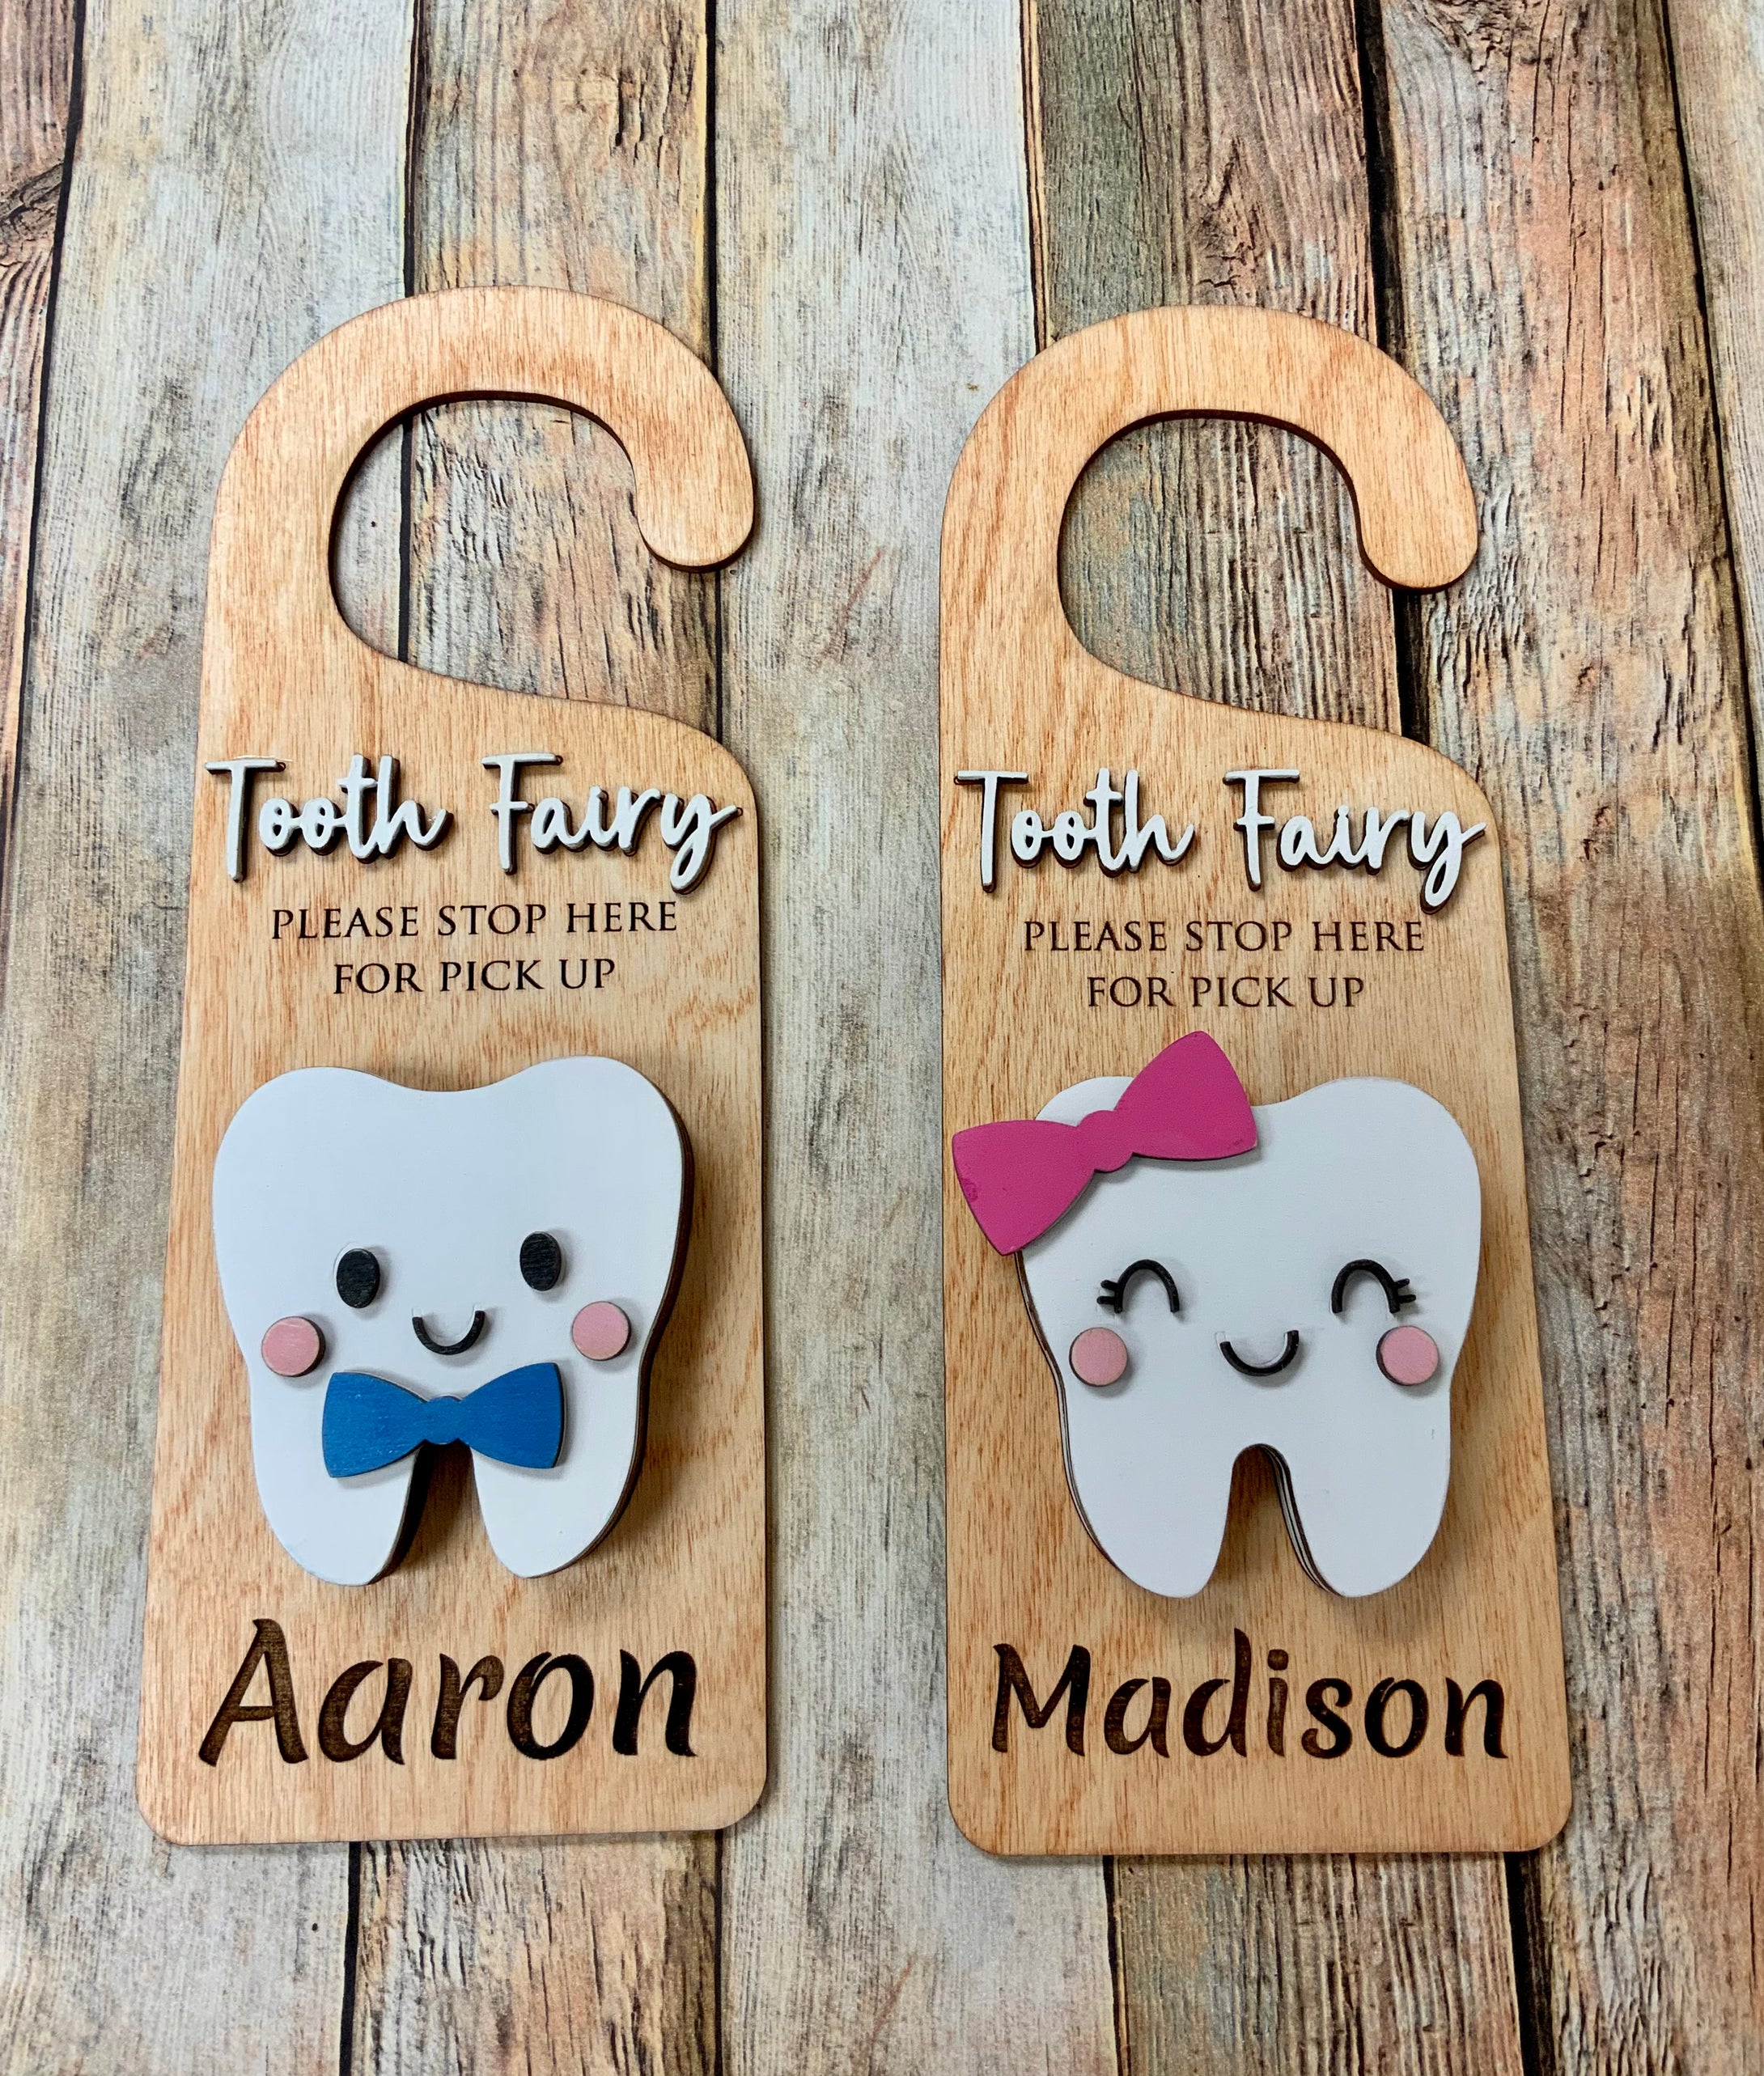 Tooth Fairy Please Stop Here Door Hanger with Tooth Pocket for Gift or Money